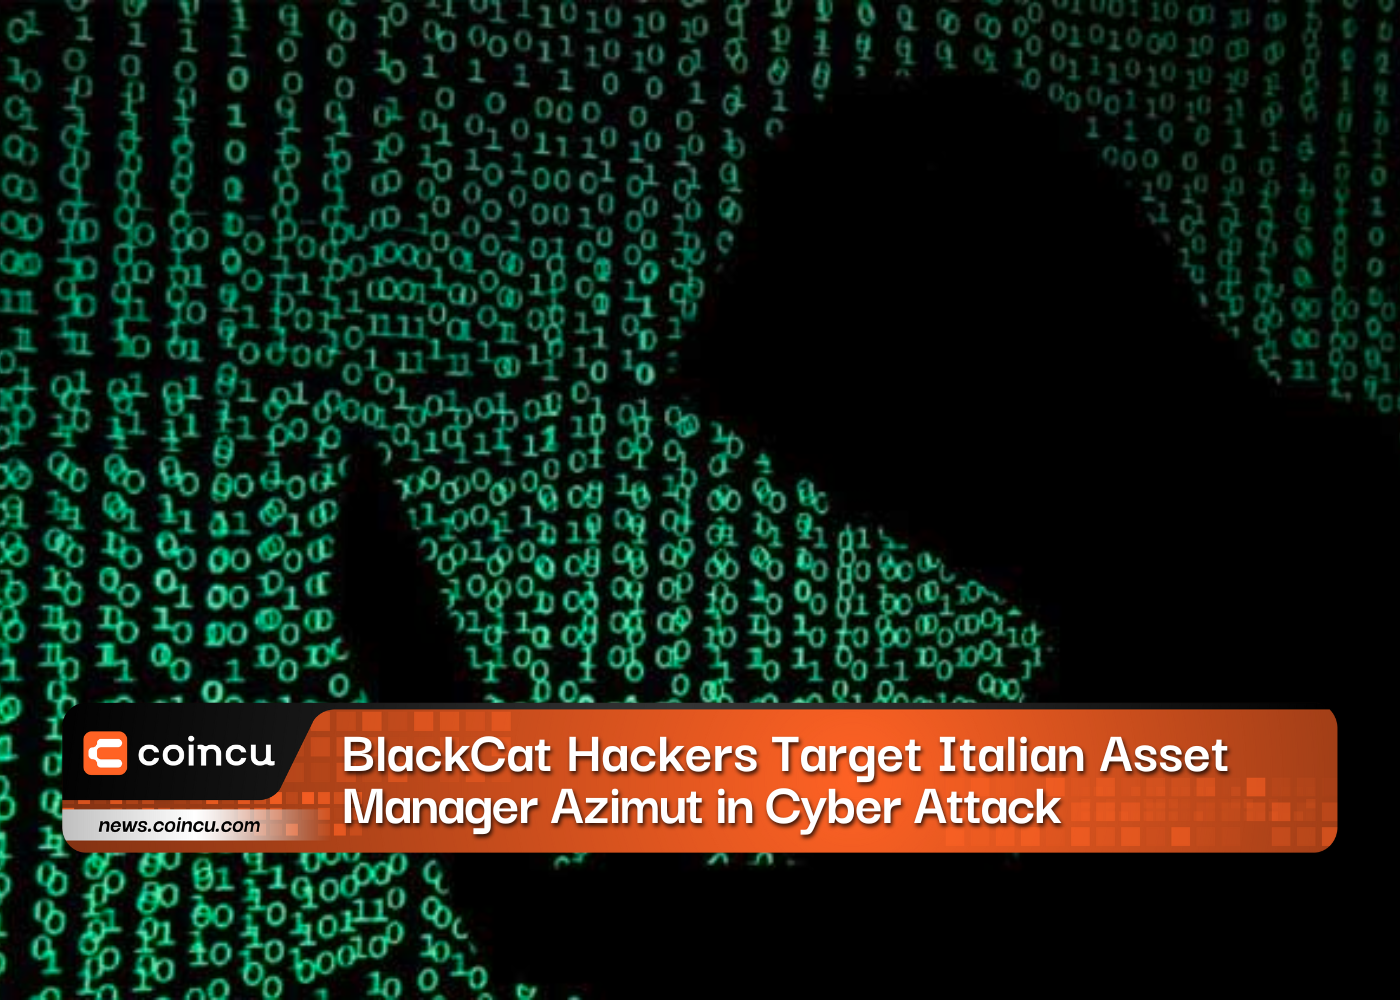 BlackCat Hackers Target Italian Asset Manager Azimut in Cyber Attack